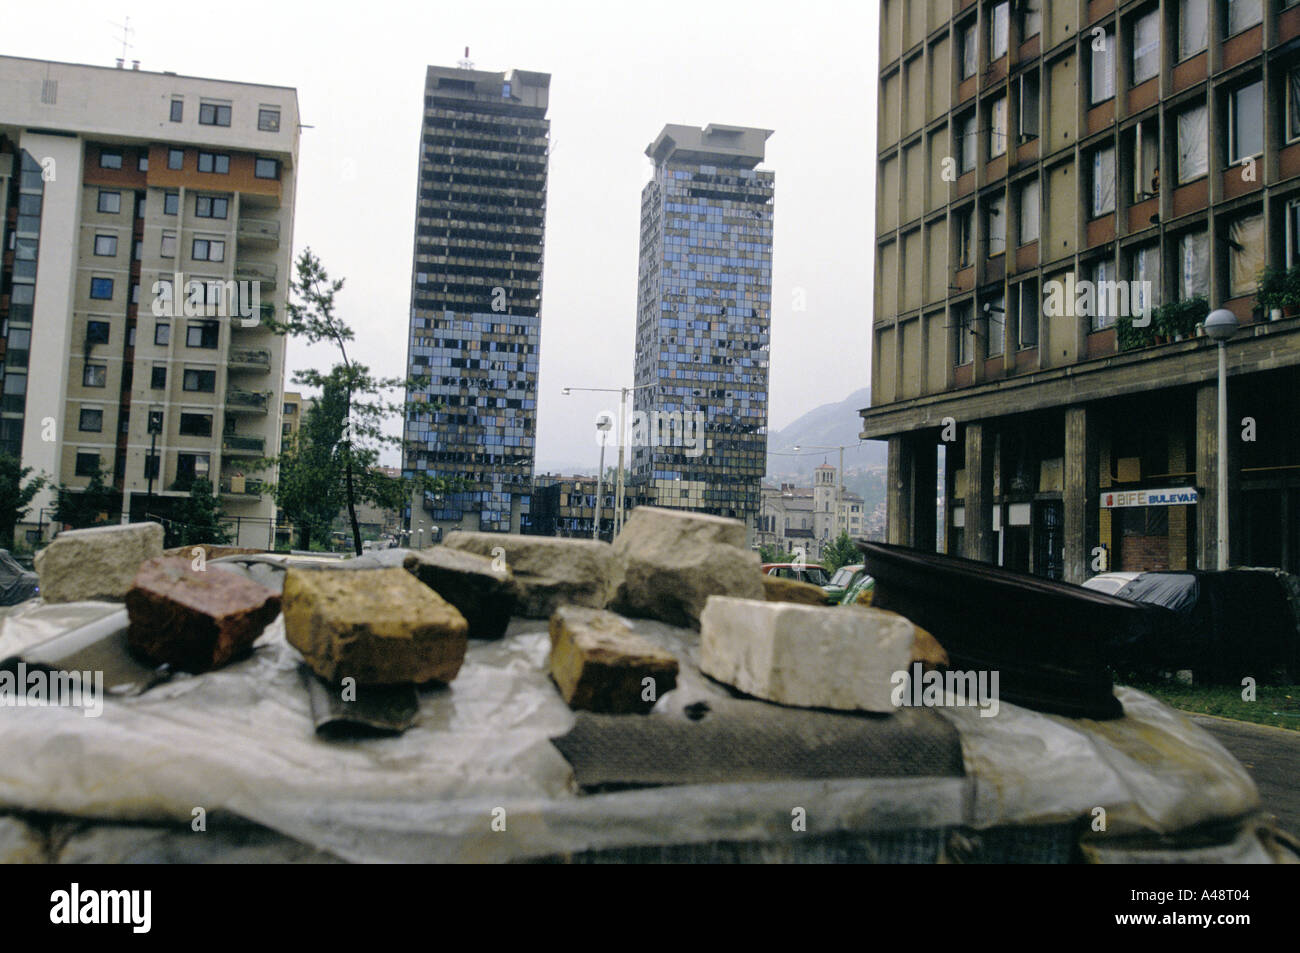 sarajevo july 1994 two high rise tower block buildings with windows shot out amongst war damaged buildings Stock Photo